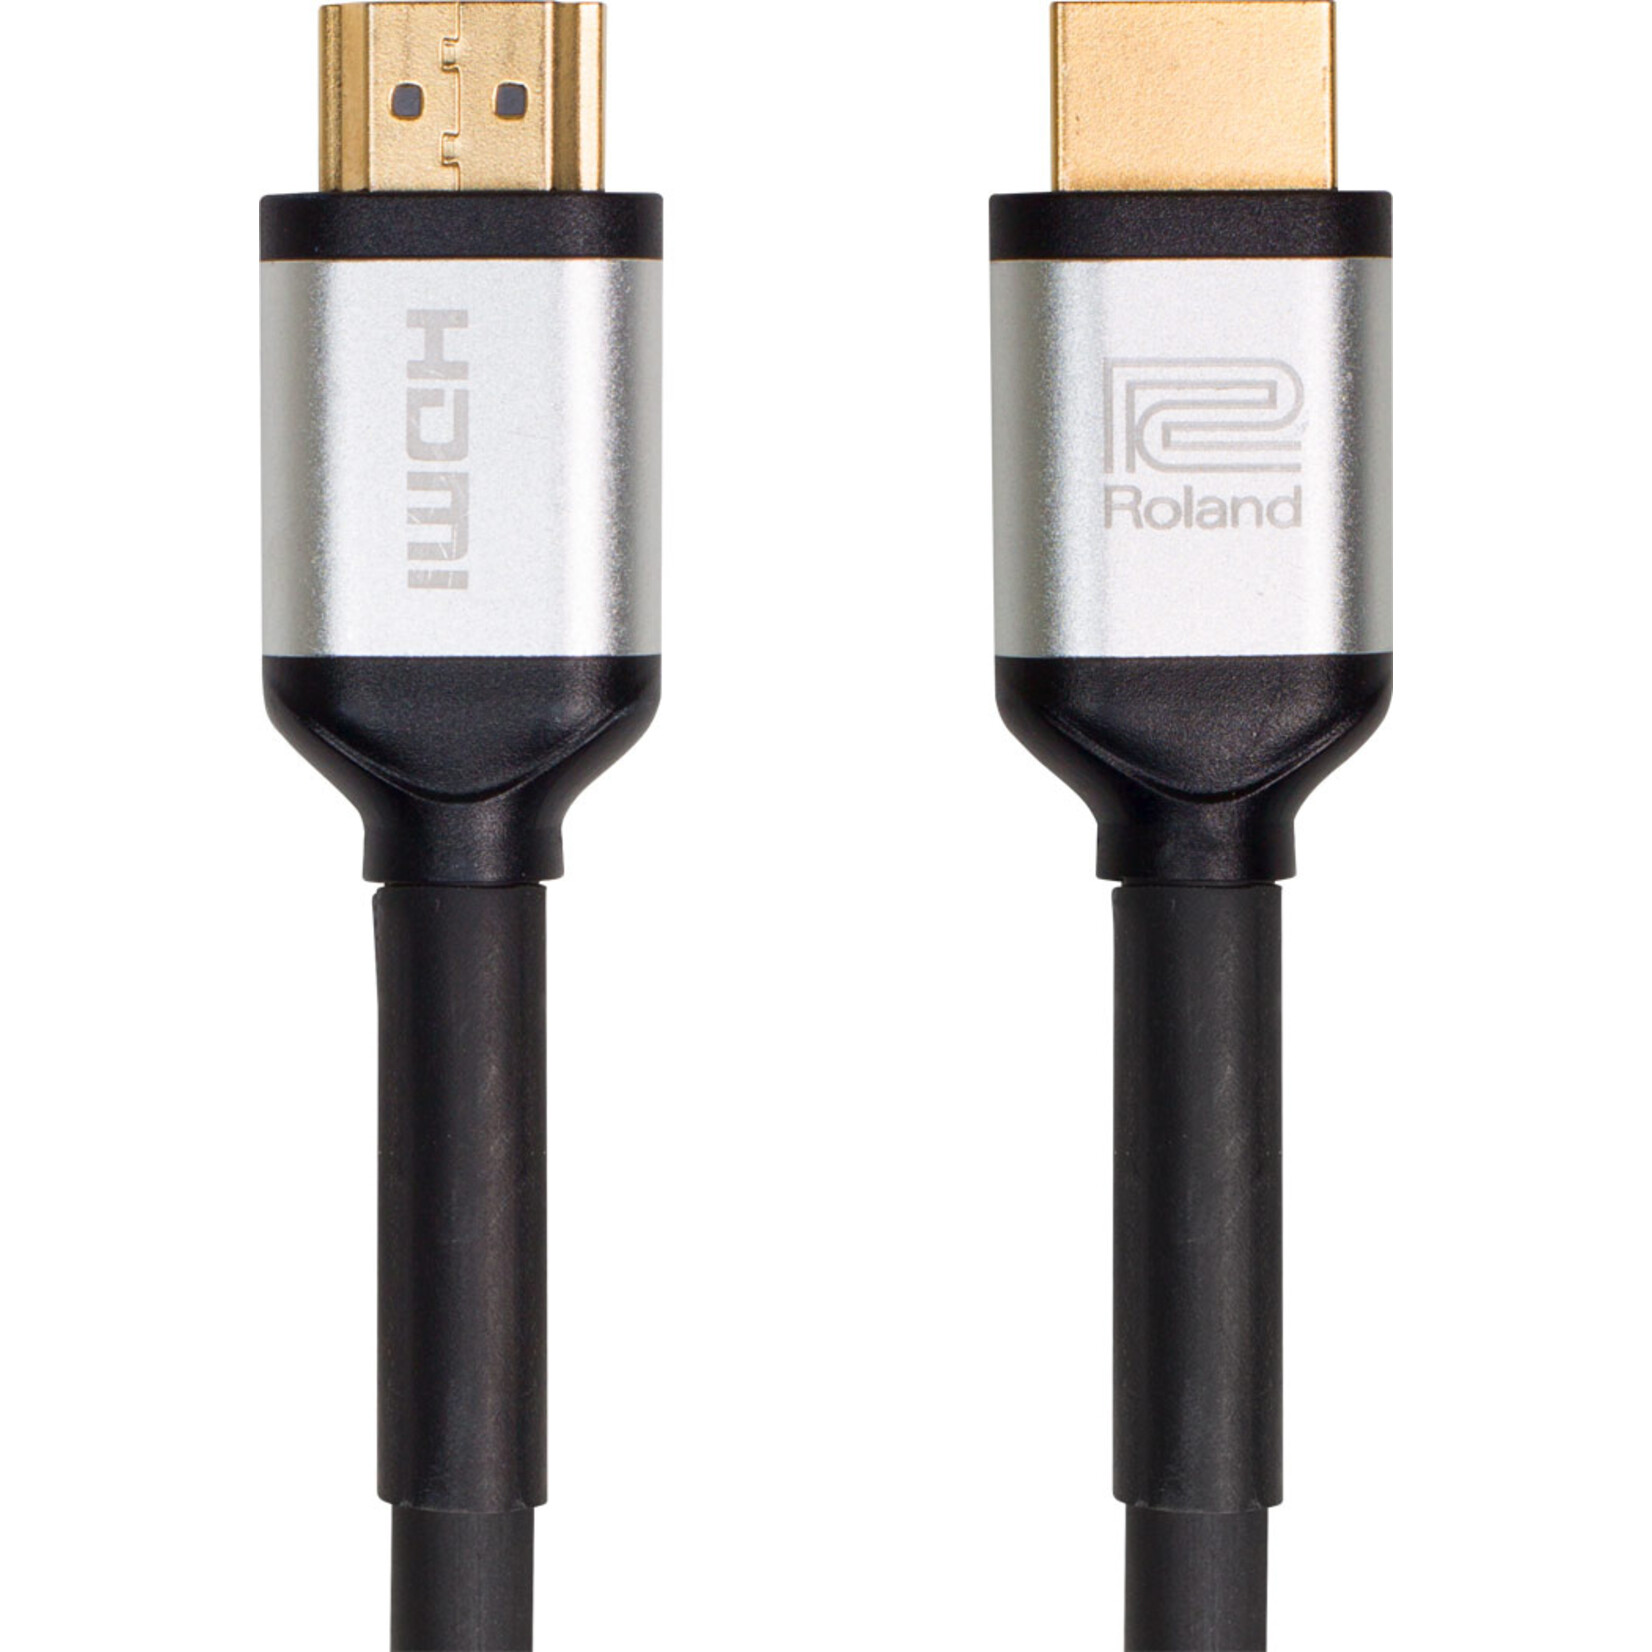 Roland Black Series HDMI 2.0 Cable - 6 Ft